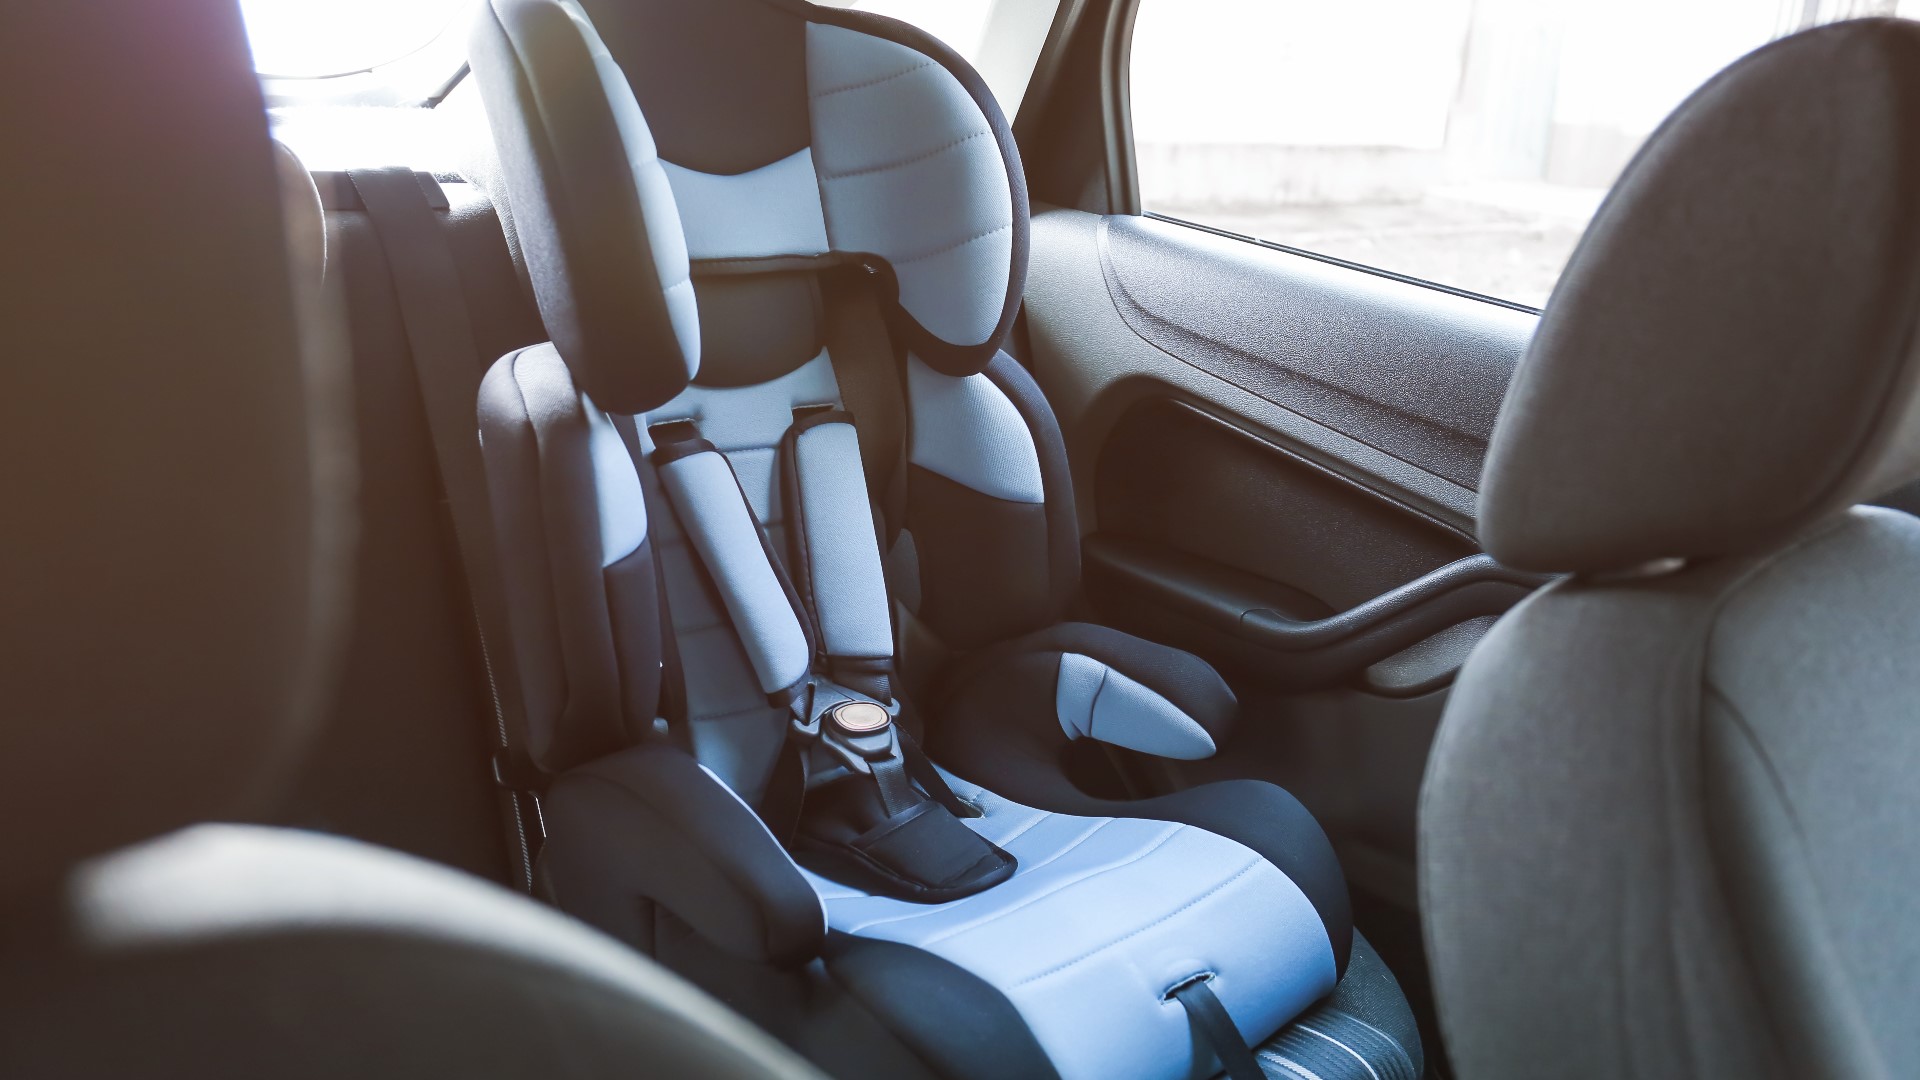 NHTSA tool makes finding and installing a car seat easier.